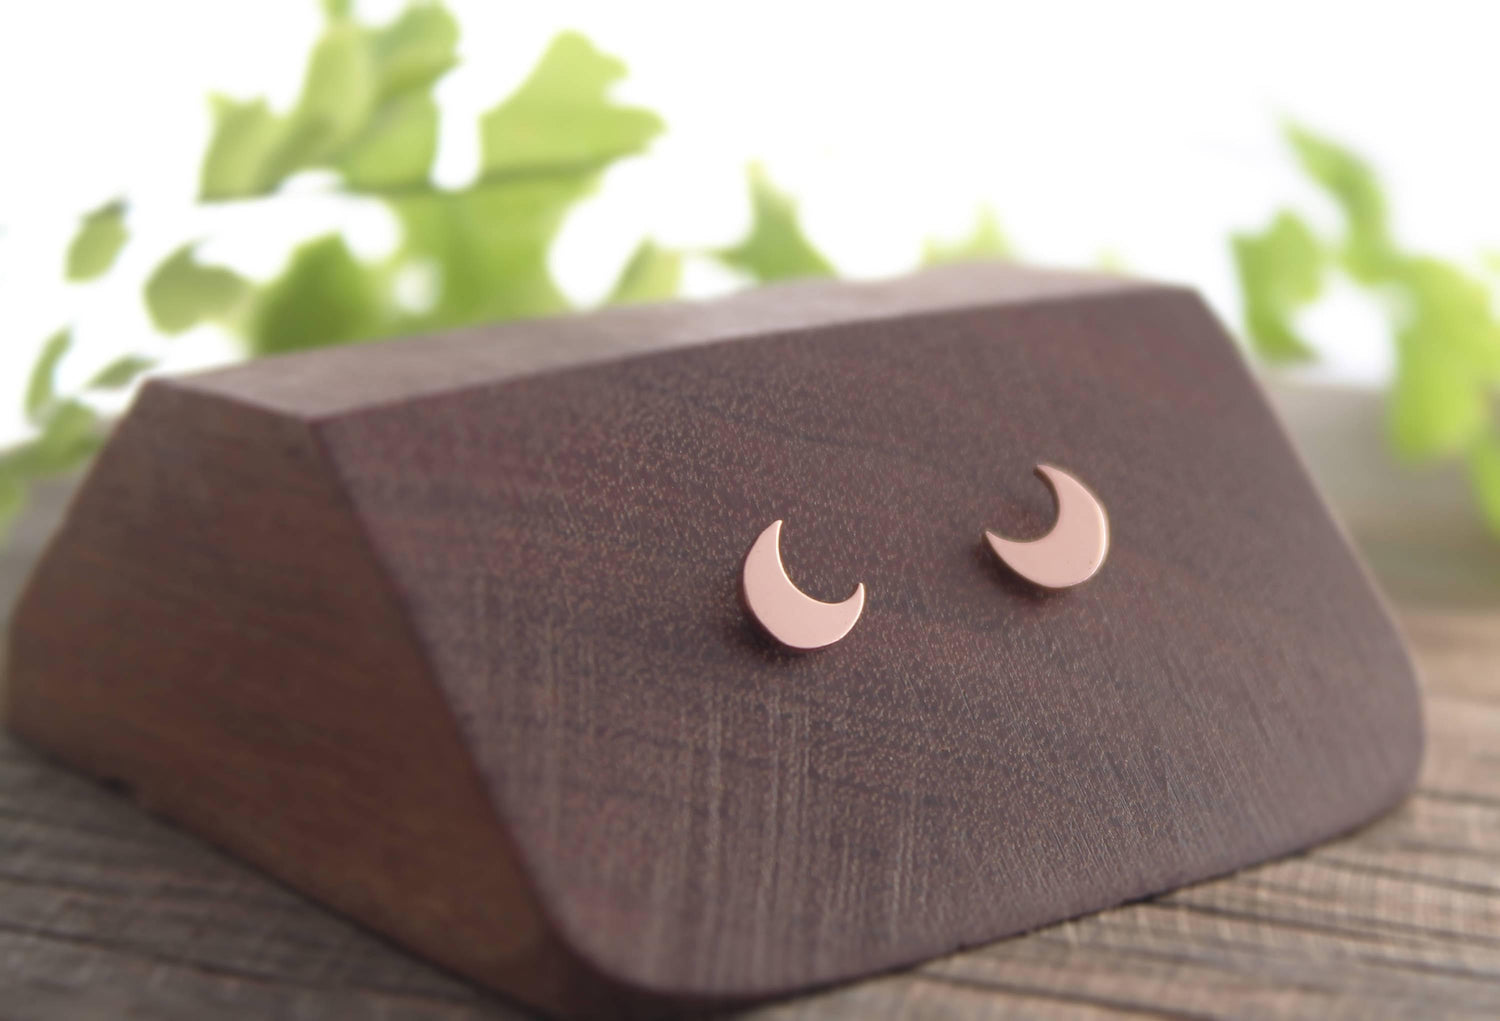 Boho Crescent Moon Studs, Hand Crafted from Copper - Sweet November Jewelry